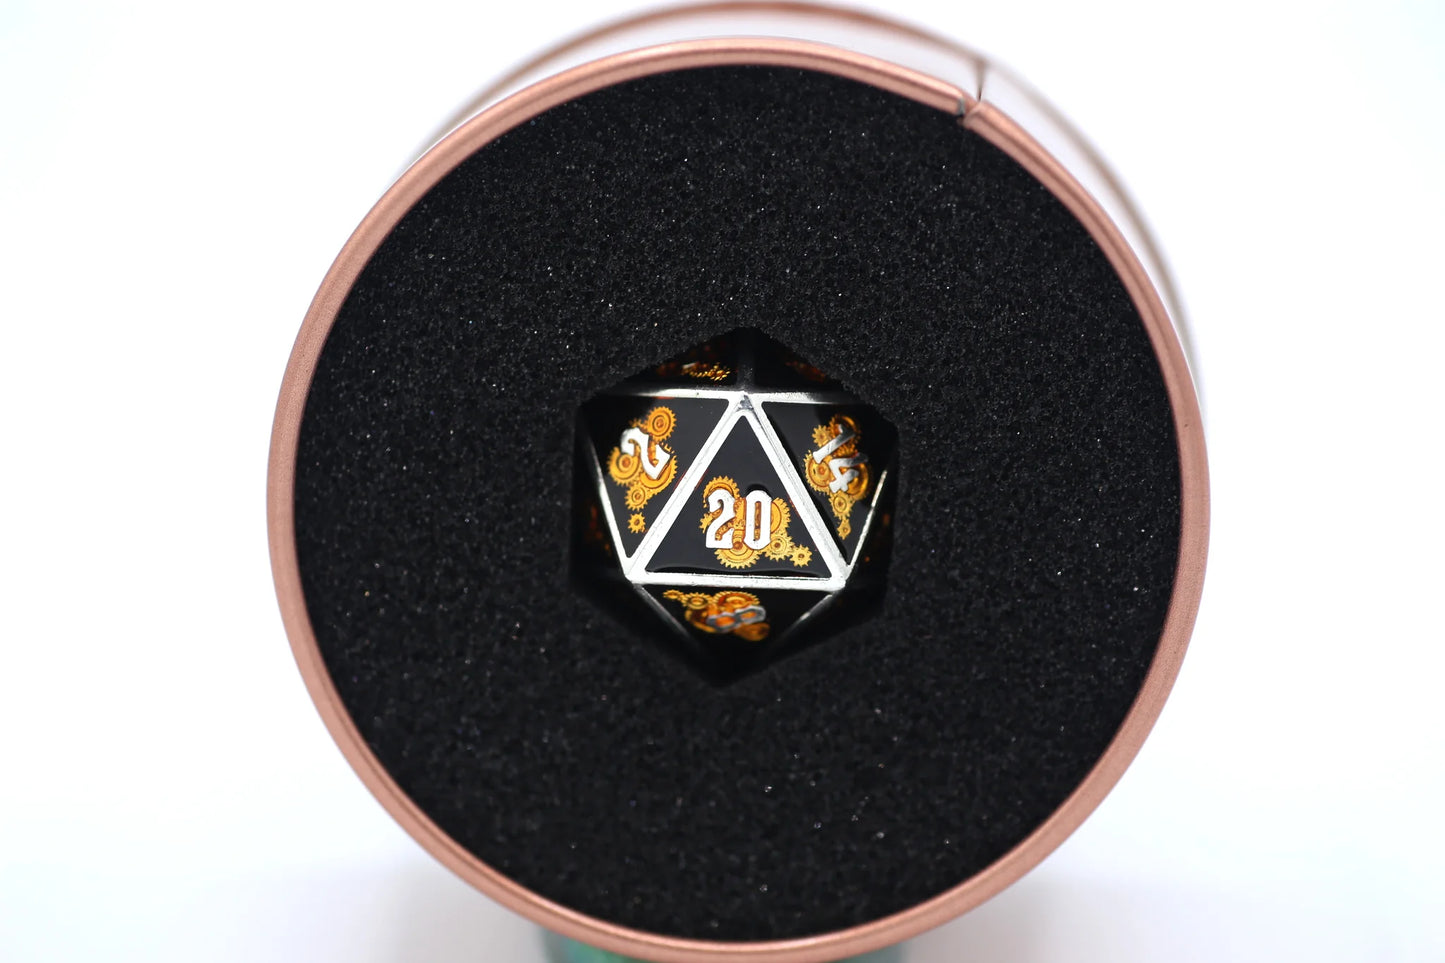 Metal Gear d20 Dice - Gold and Black